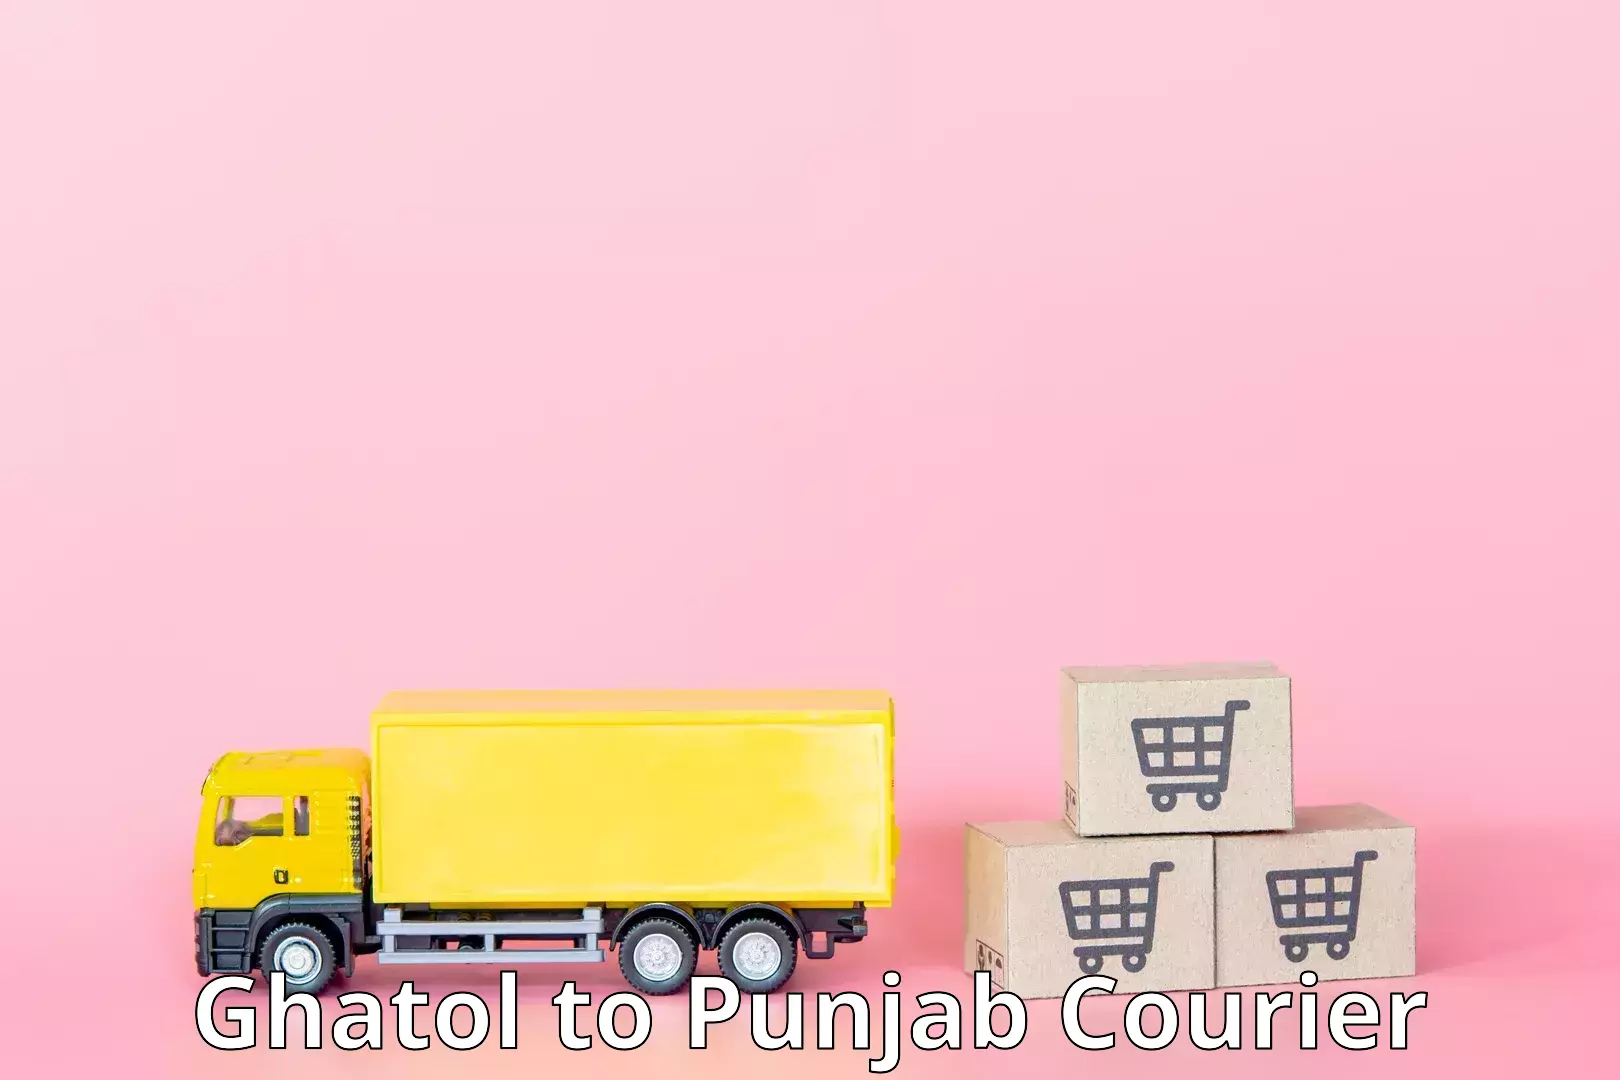 Tech-enabled shipping Ghatol to Sangrur